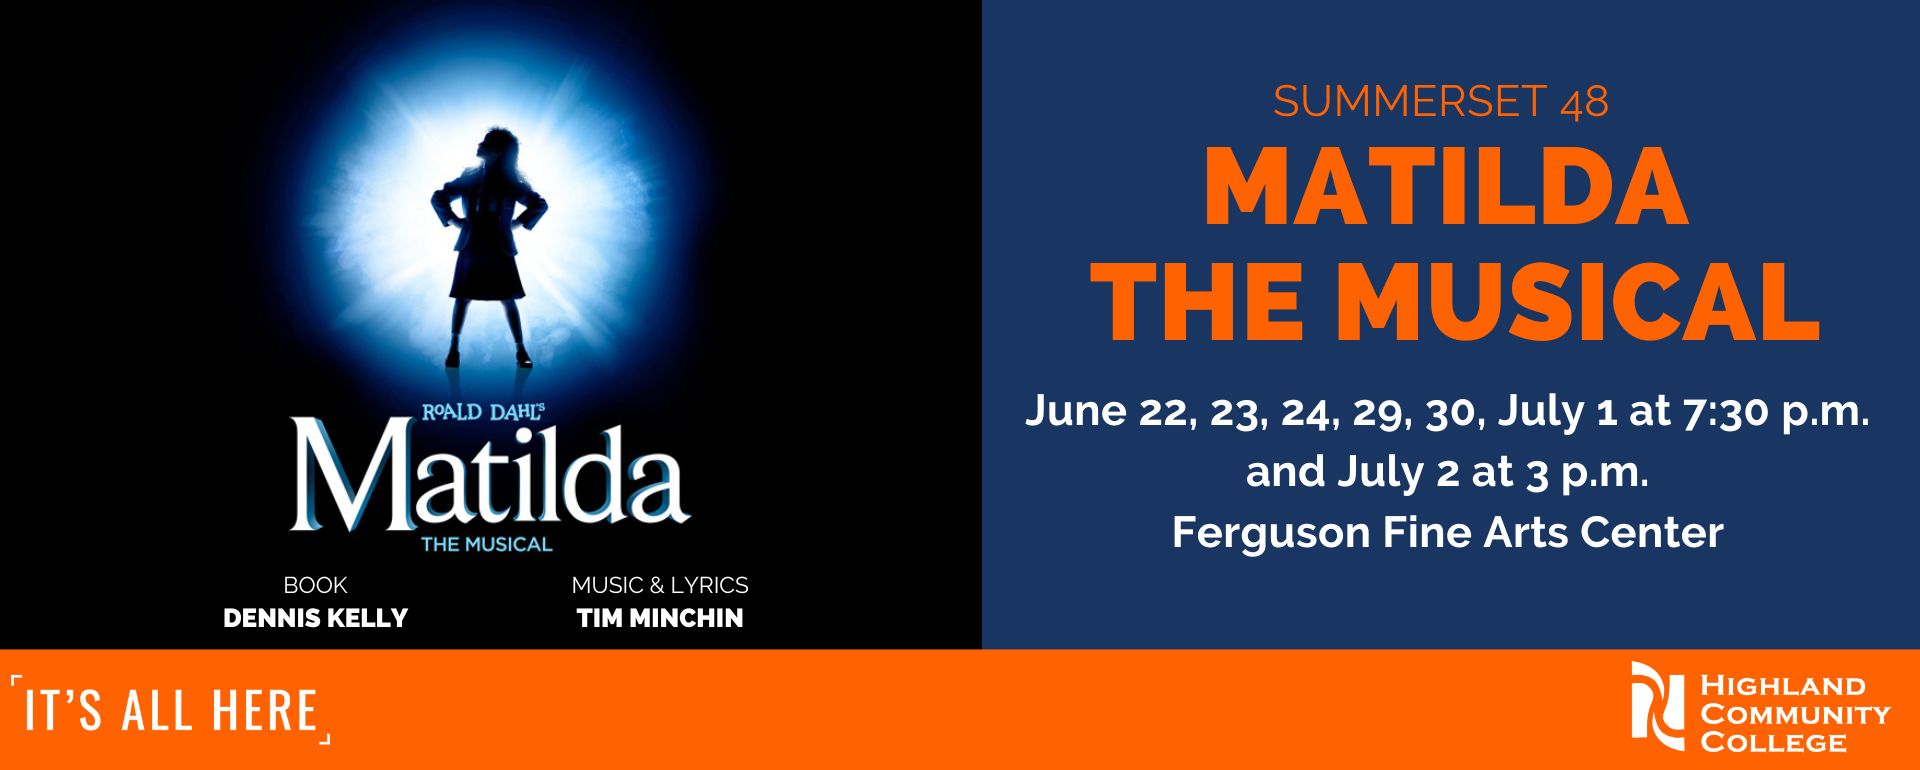 Roald Dahl's Matilda the Musical is at 7:30 p.m. on June 22, 23, 24, 29, 30 and July 1 and at 3 pm on July 2 in the Ferguson Fine Arts Center. A silhouette of a girl in front of a blue sunburst is in the photo space with the text Roald Dahl's Matilda the Musical Book by Dennis Kelly and Music and Lyrics by Tim Minchin. An orange bar at the bottom contains the It's All Here and HCC logos.